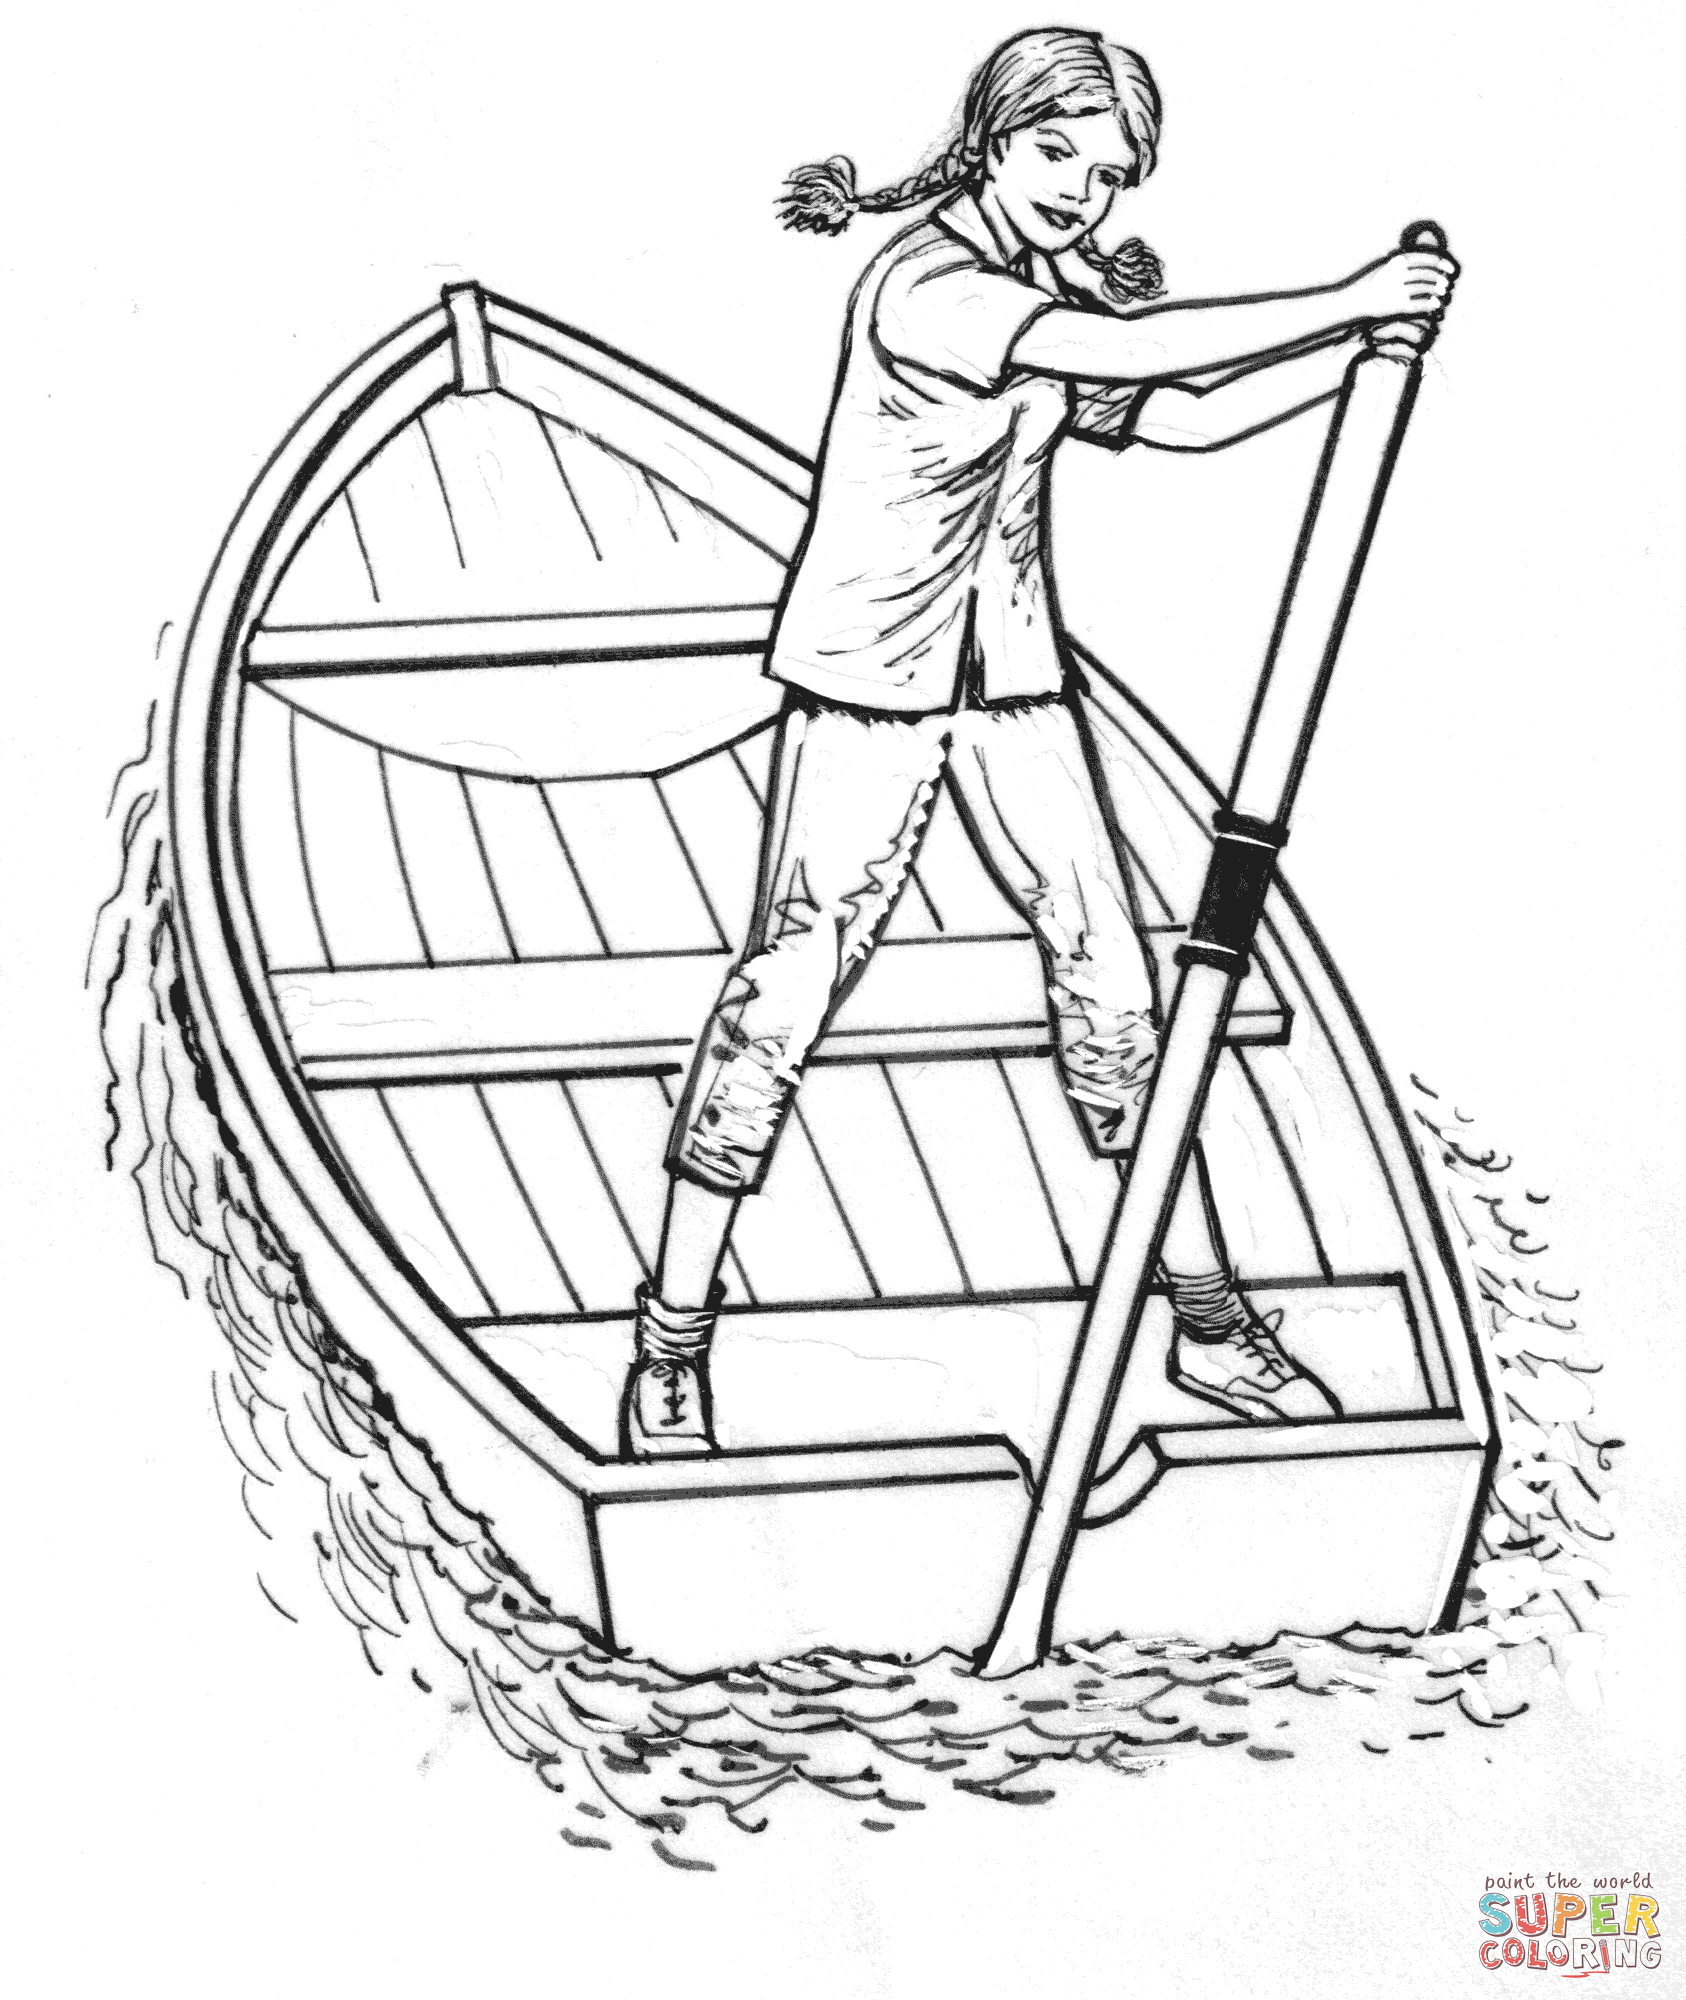 Fishing Boat coloring page | Free Printable Coloring Pages